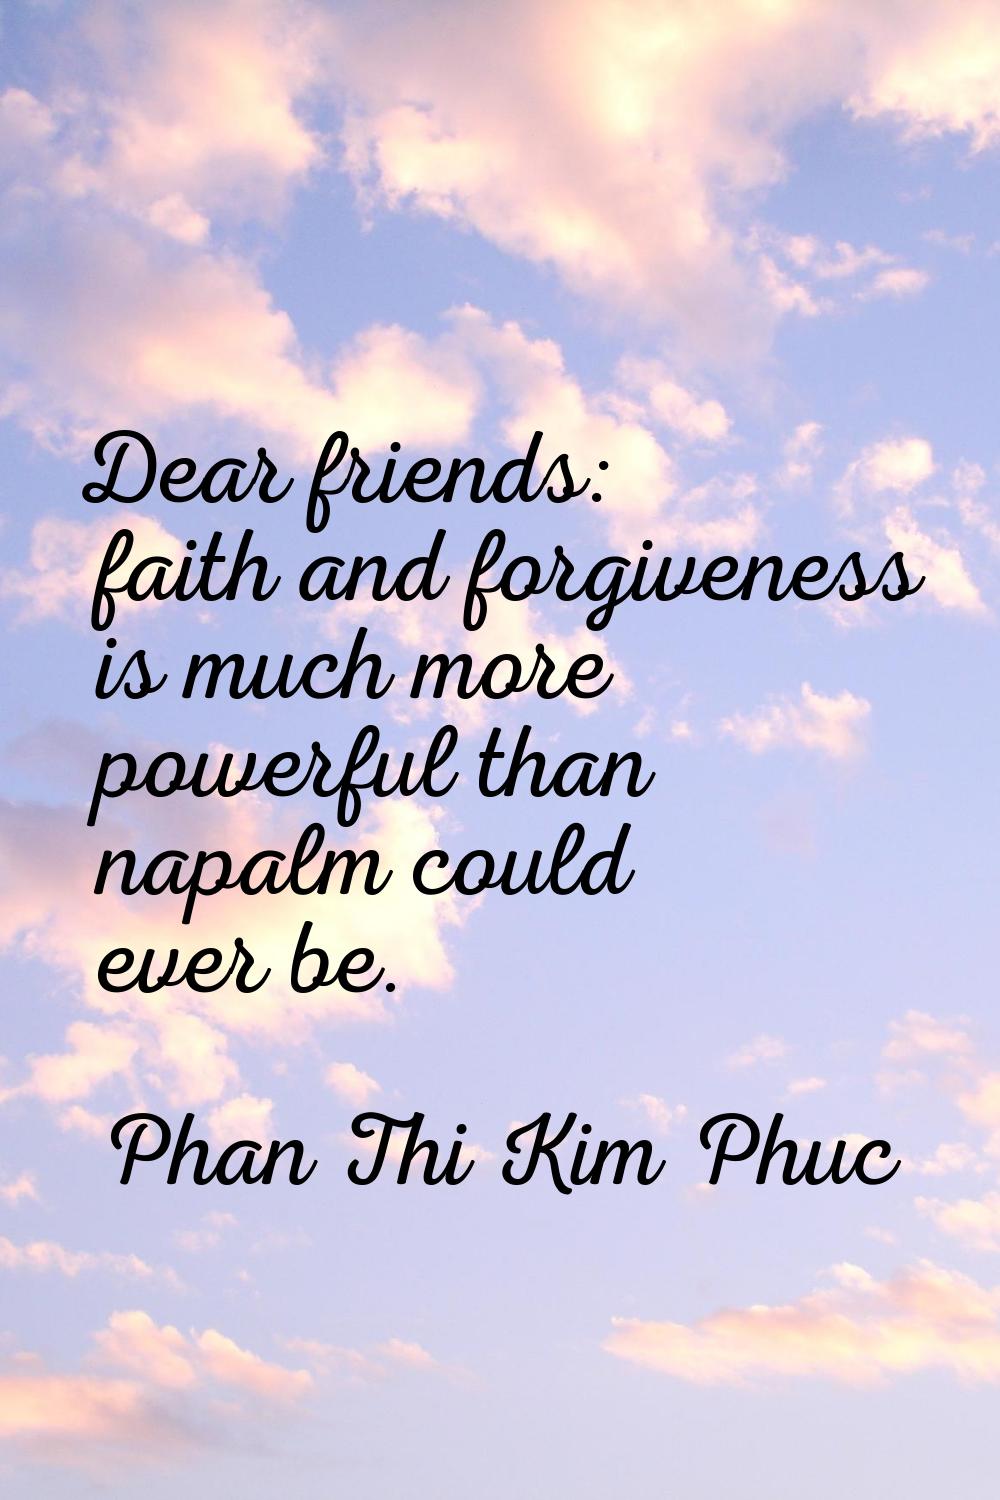 Dear friends: faith and forgiveness is much more powerful than napalm could ever be.